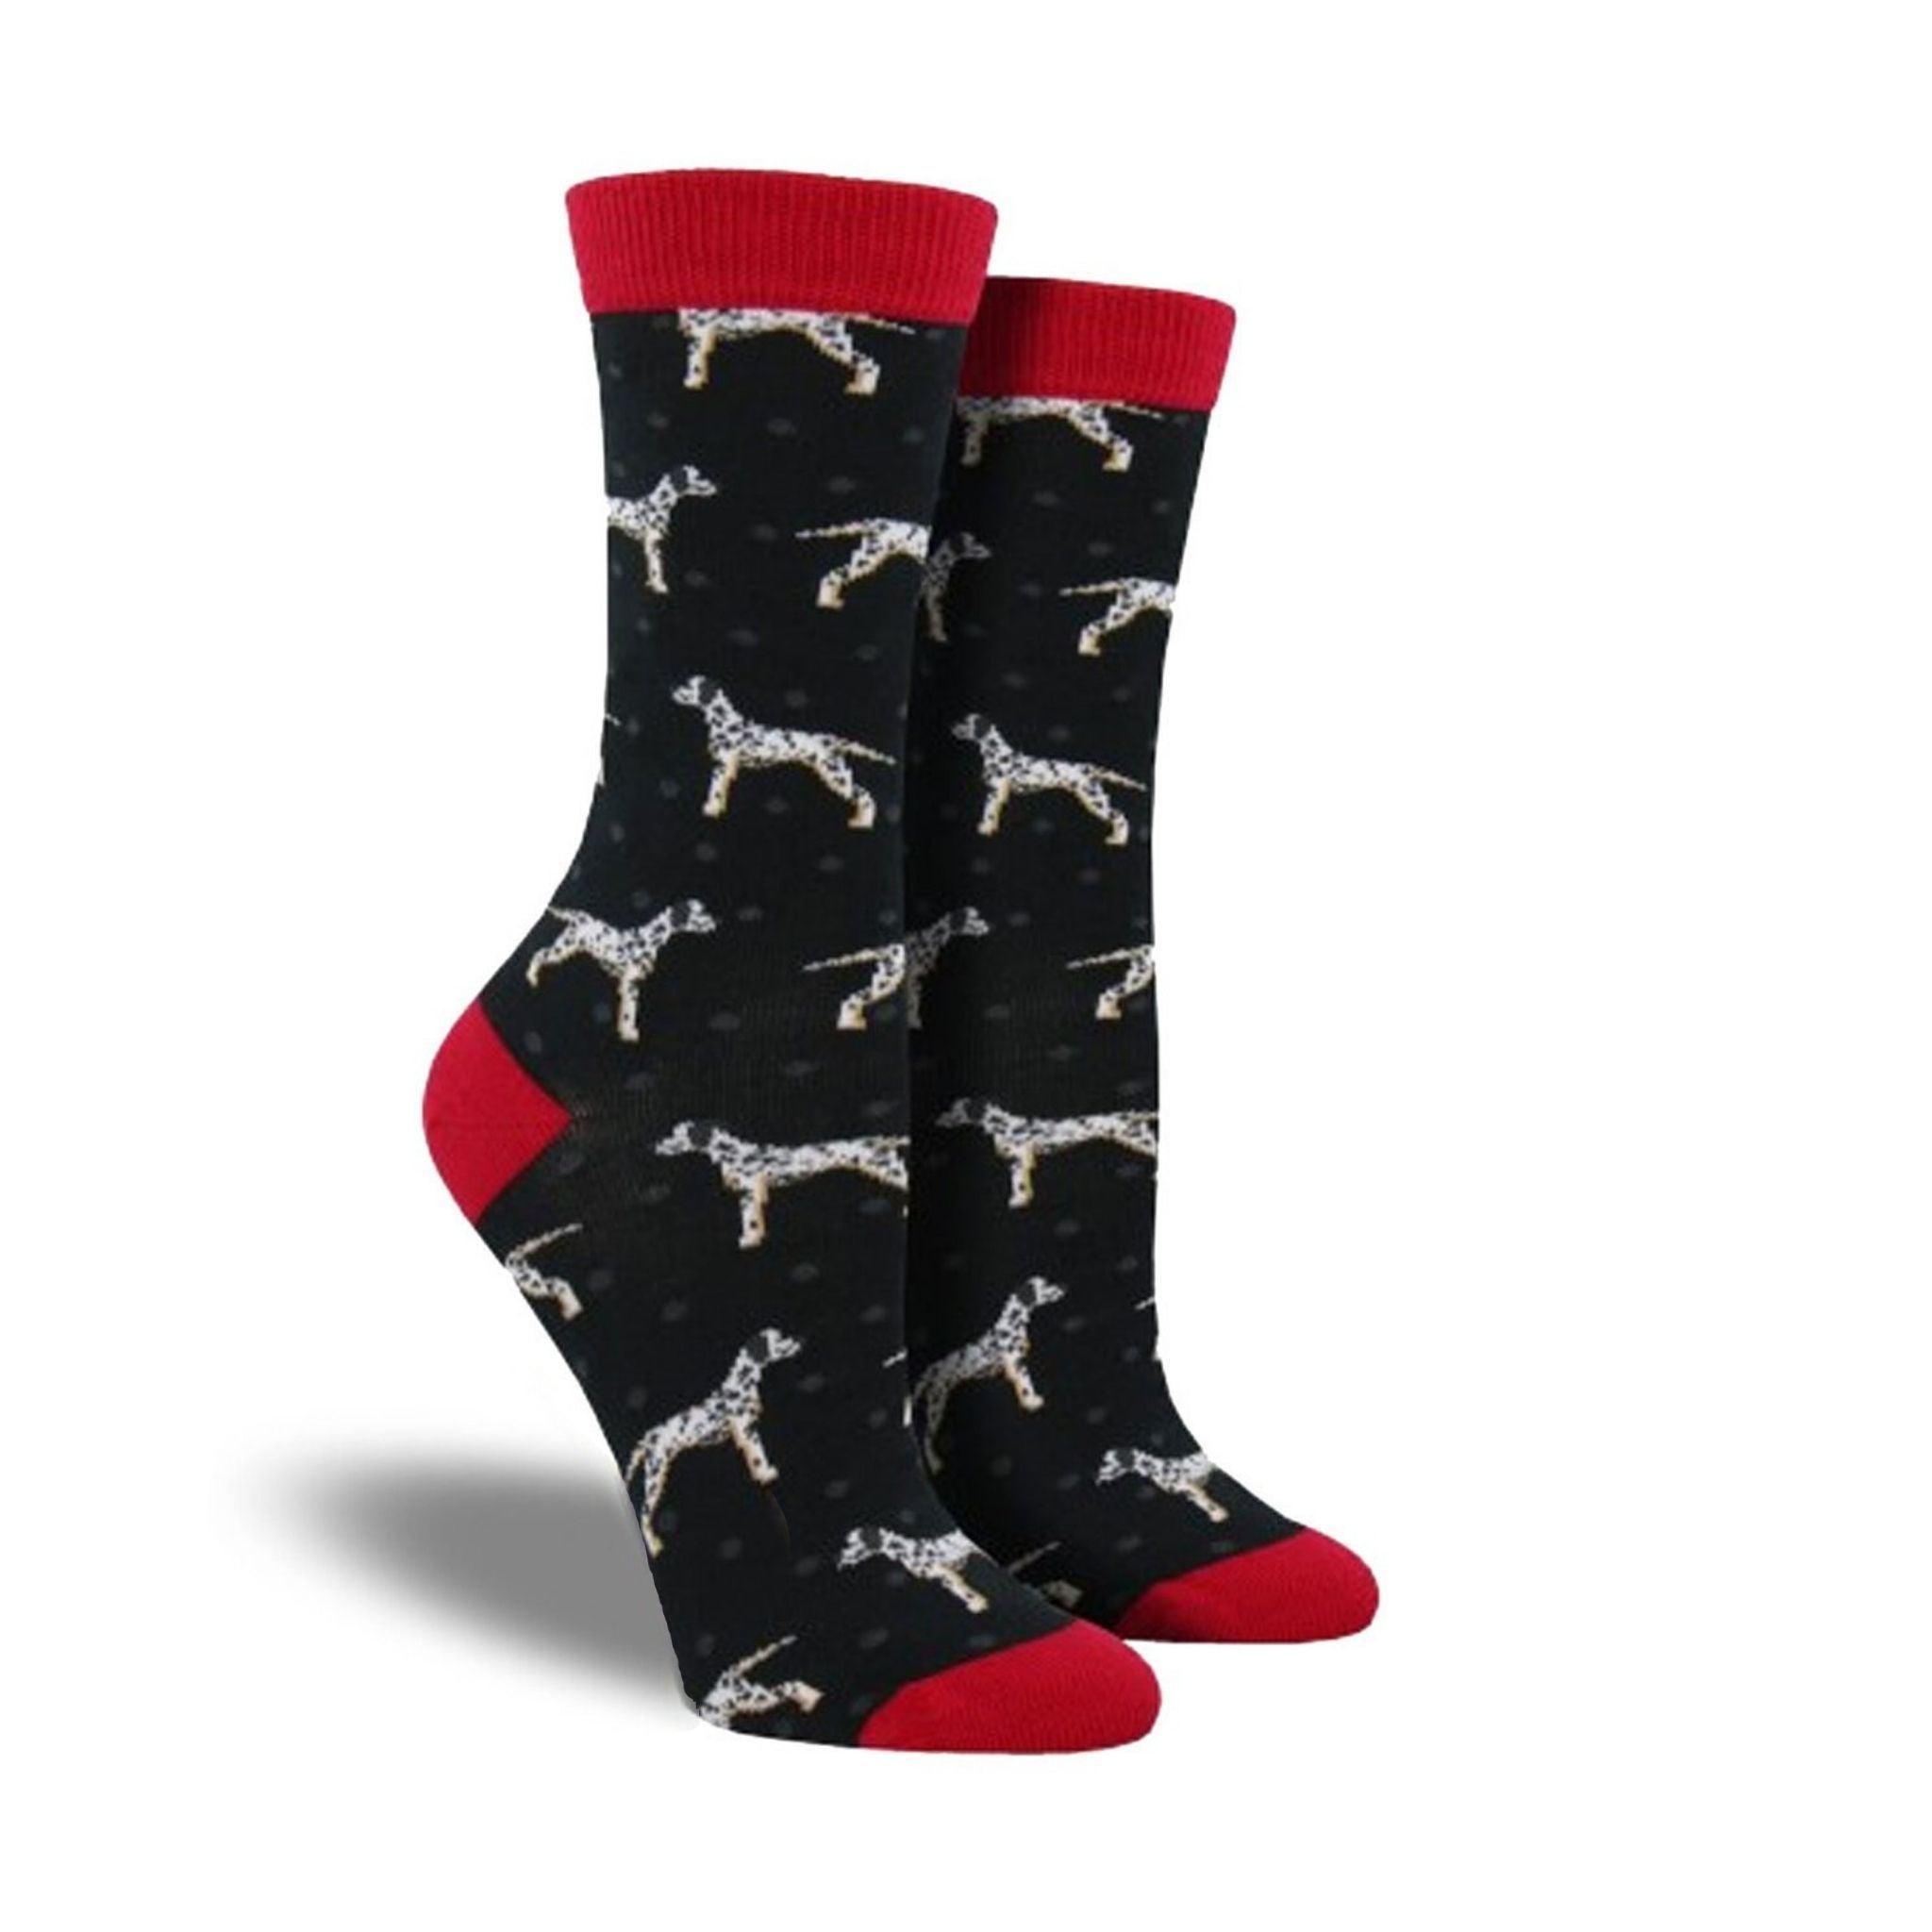 A pair of women's crew socks featuring dalmations.